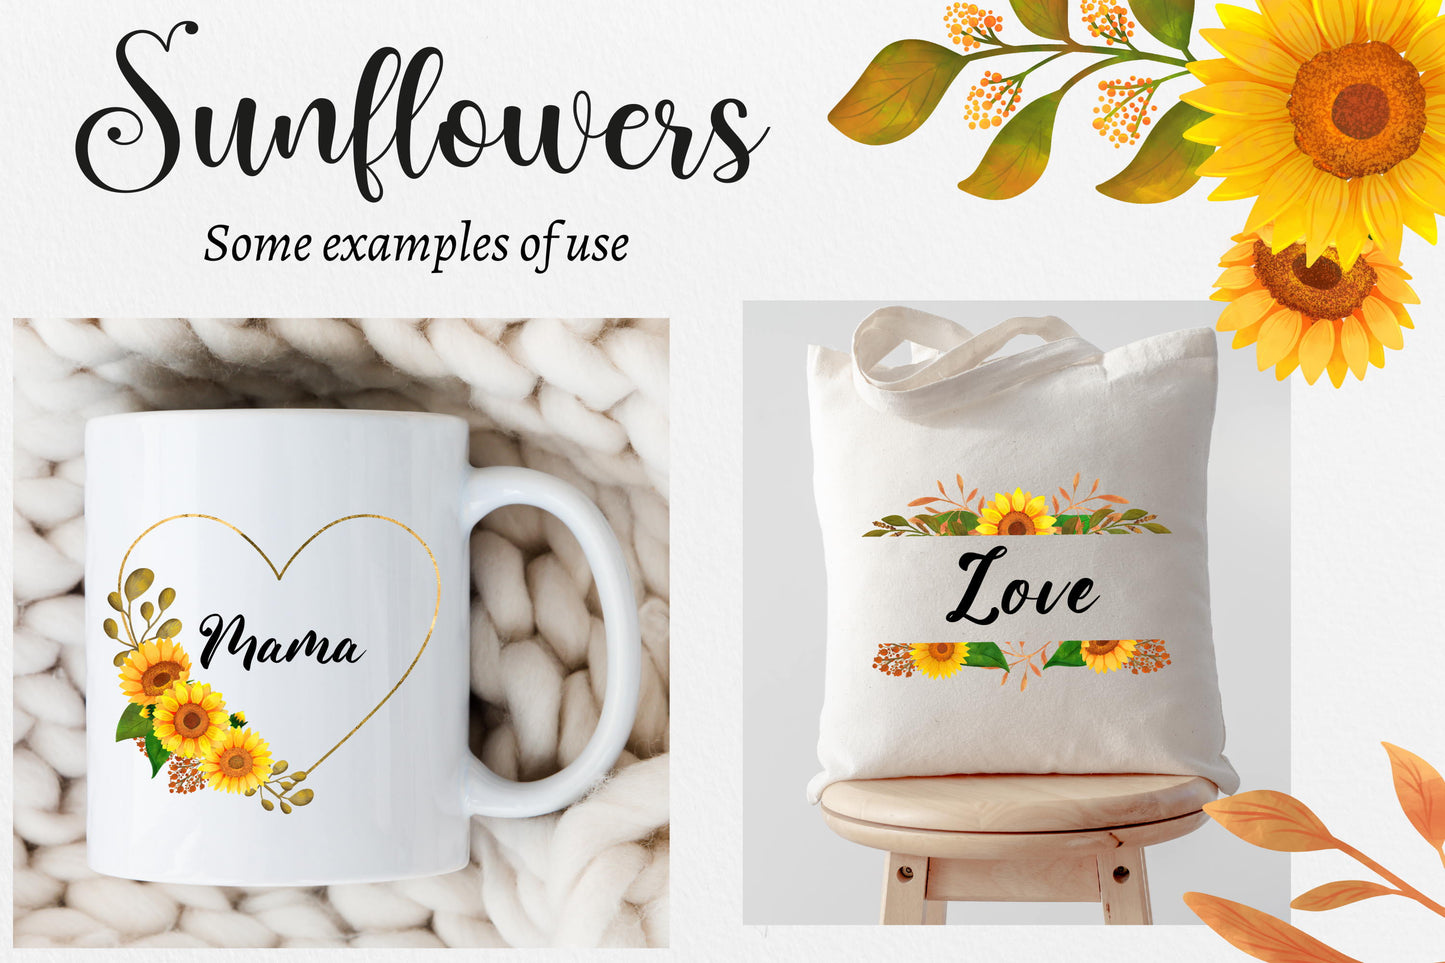 Hand painted sunflower clipartSunflower floral frames PNG